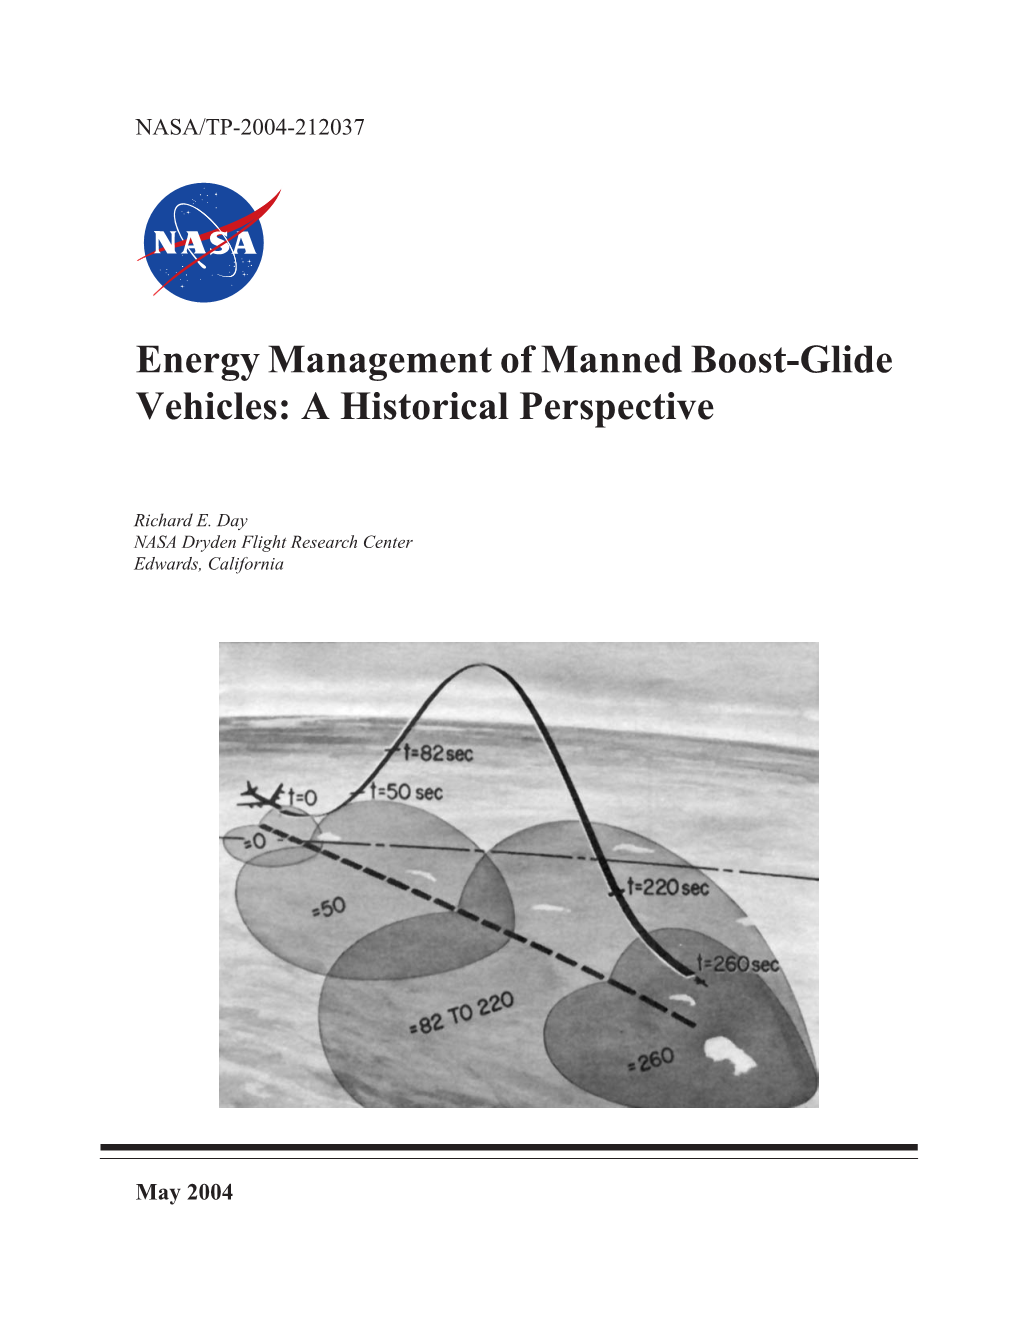 Energy Management of Manned Boost-Glide Vehicles: a Historical Perspective